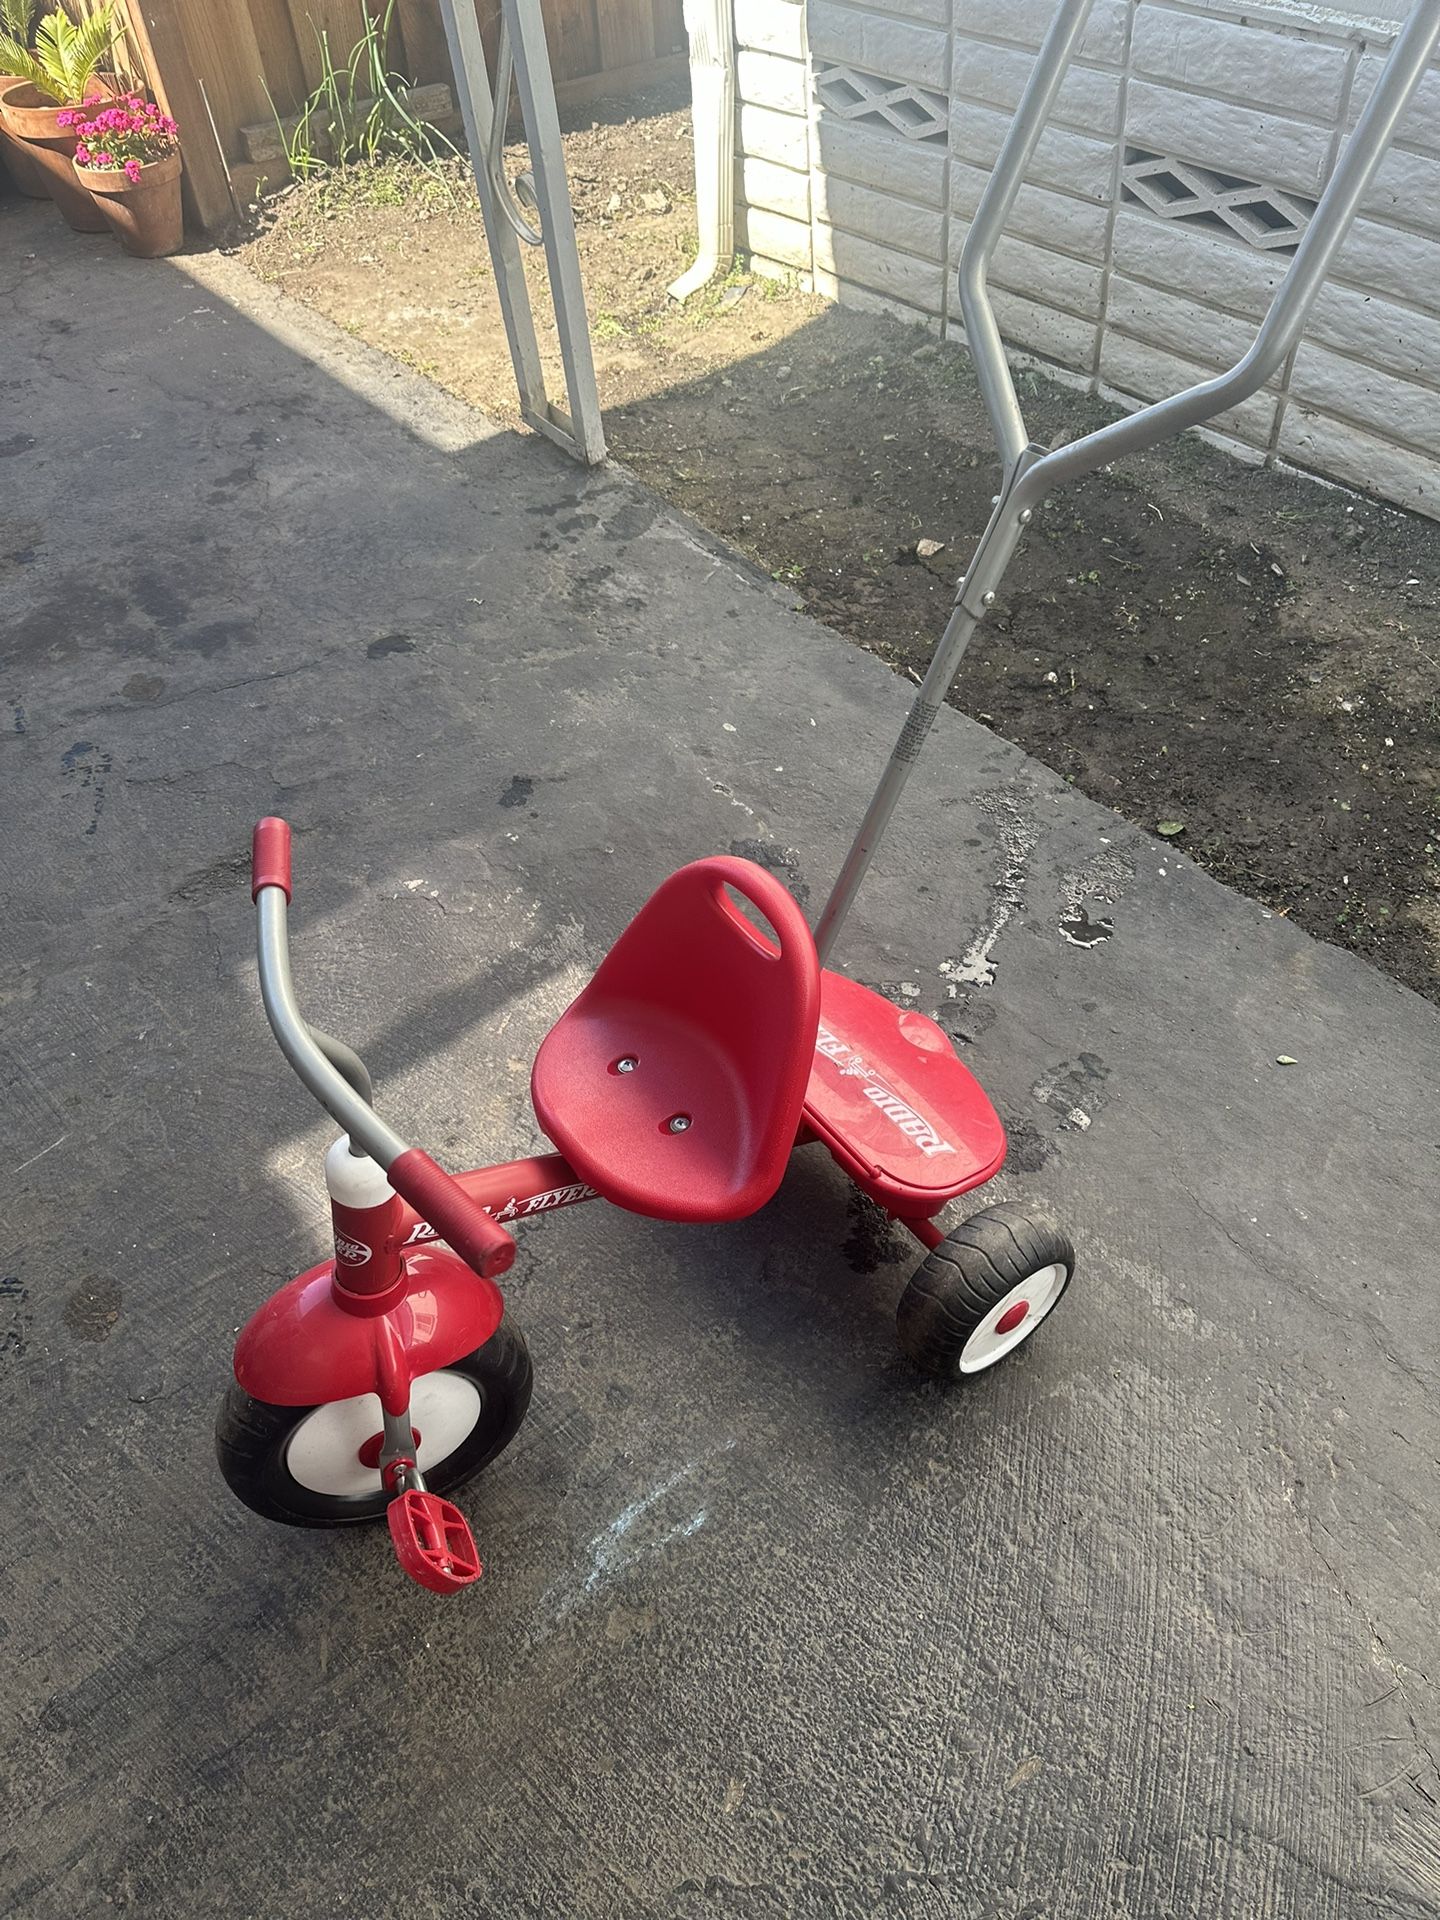 Like New Trike Bike With Push Handle, Pick Up Near Tully and Monterey Rd SJ C A95112